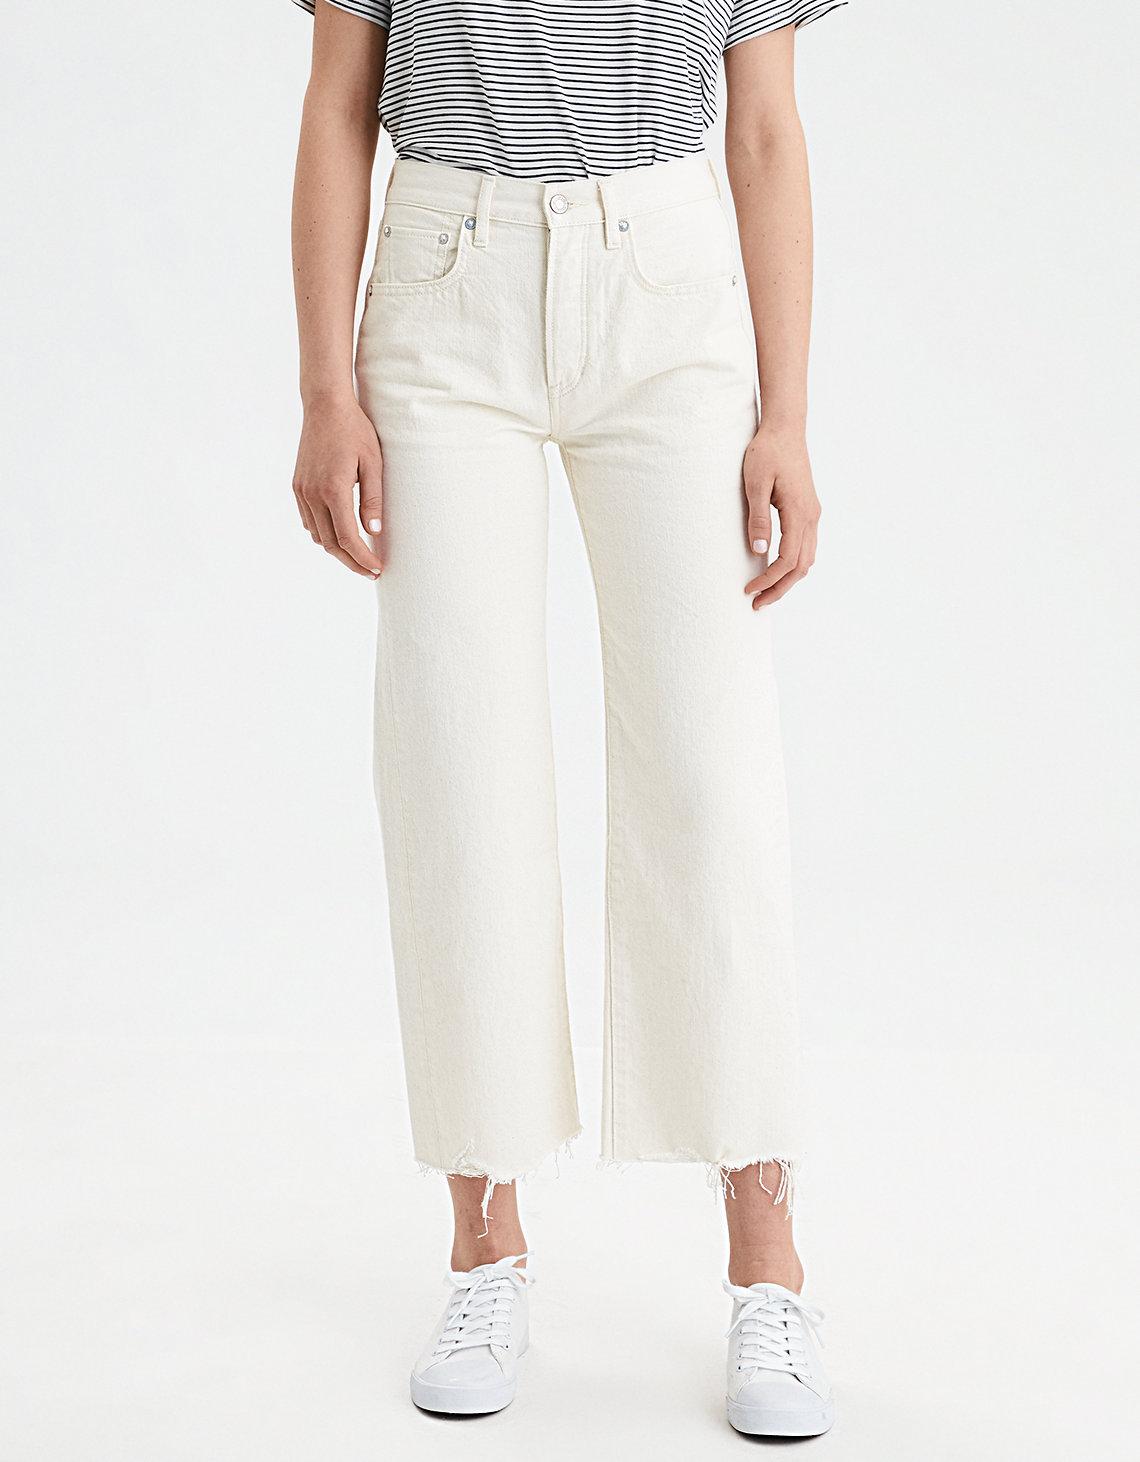 These $38 Jeans Are All I Need This Summer | Who What Wear